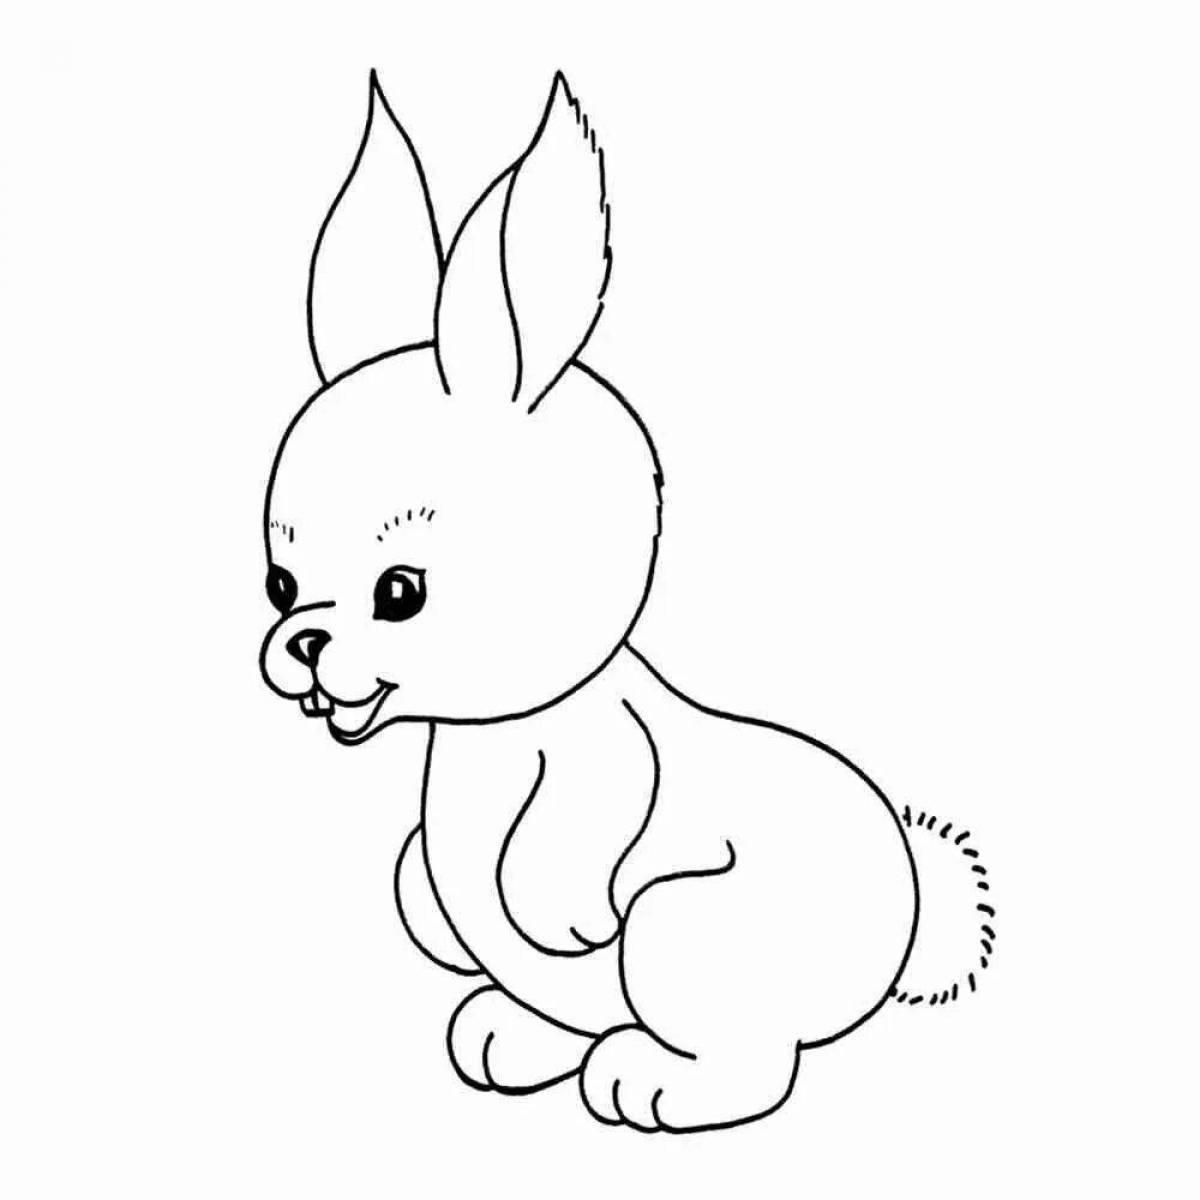 Hare drawing #3